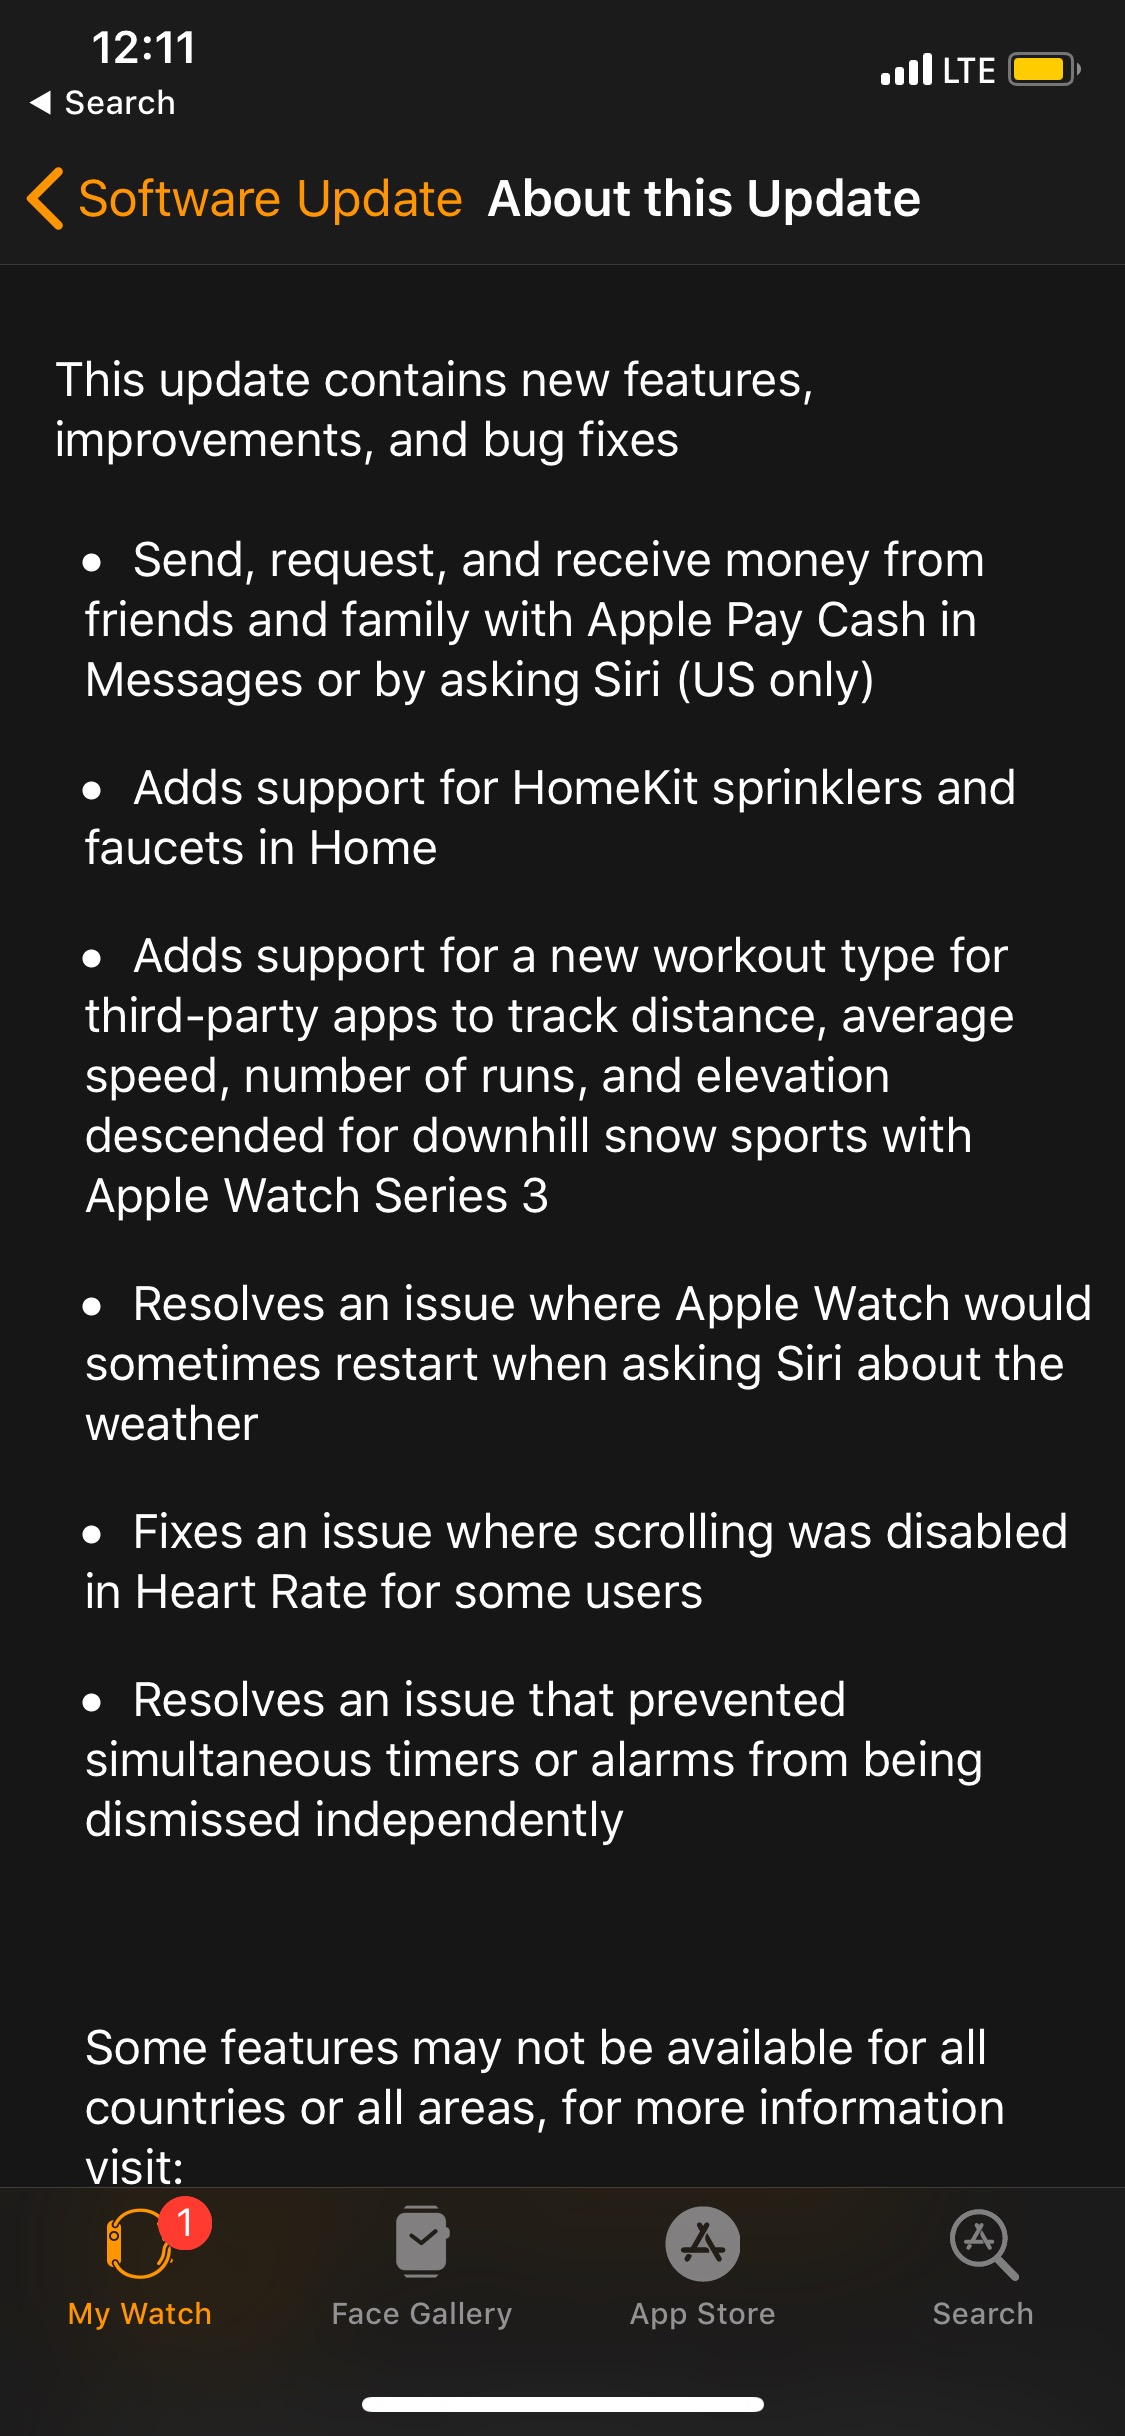 Apple Releases watchOS 4.2 With Apple Pay Cash, New Workouts, More [Download]